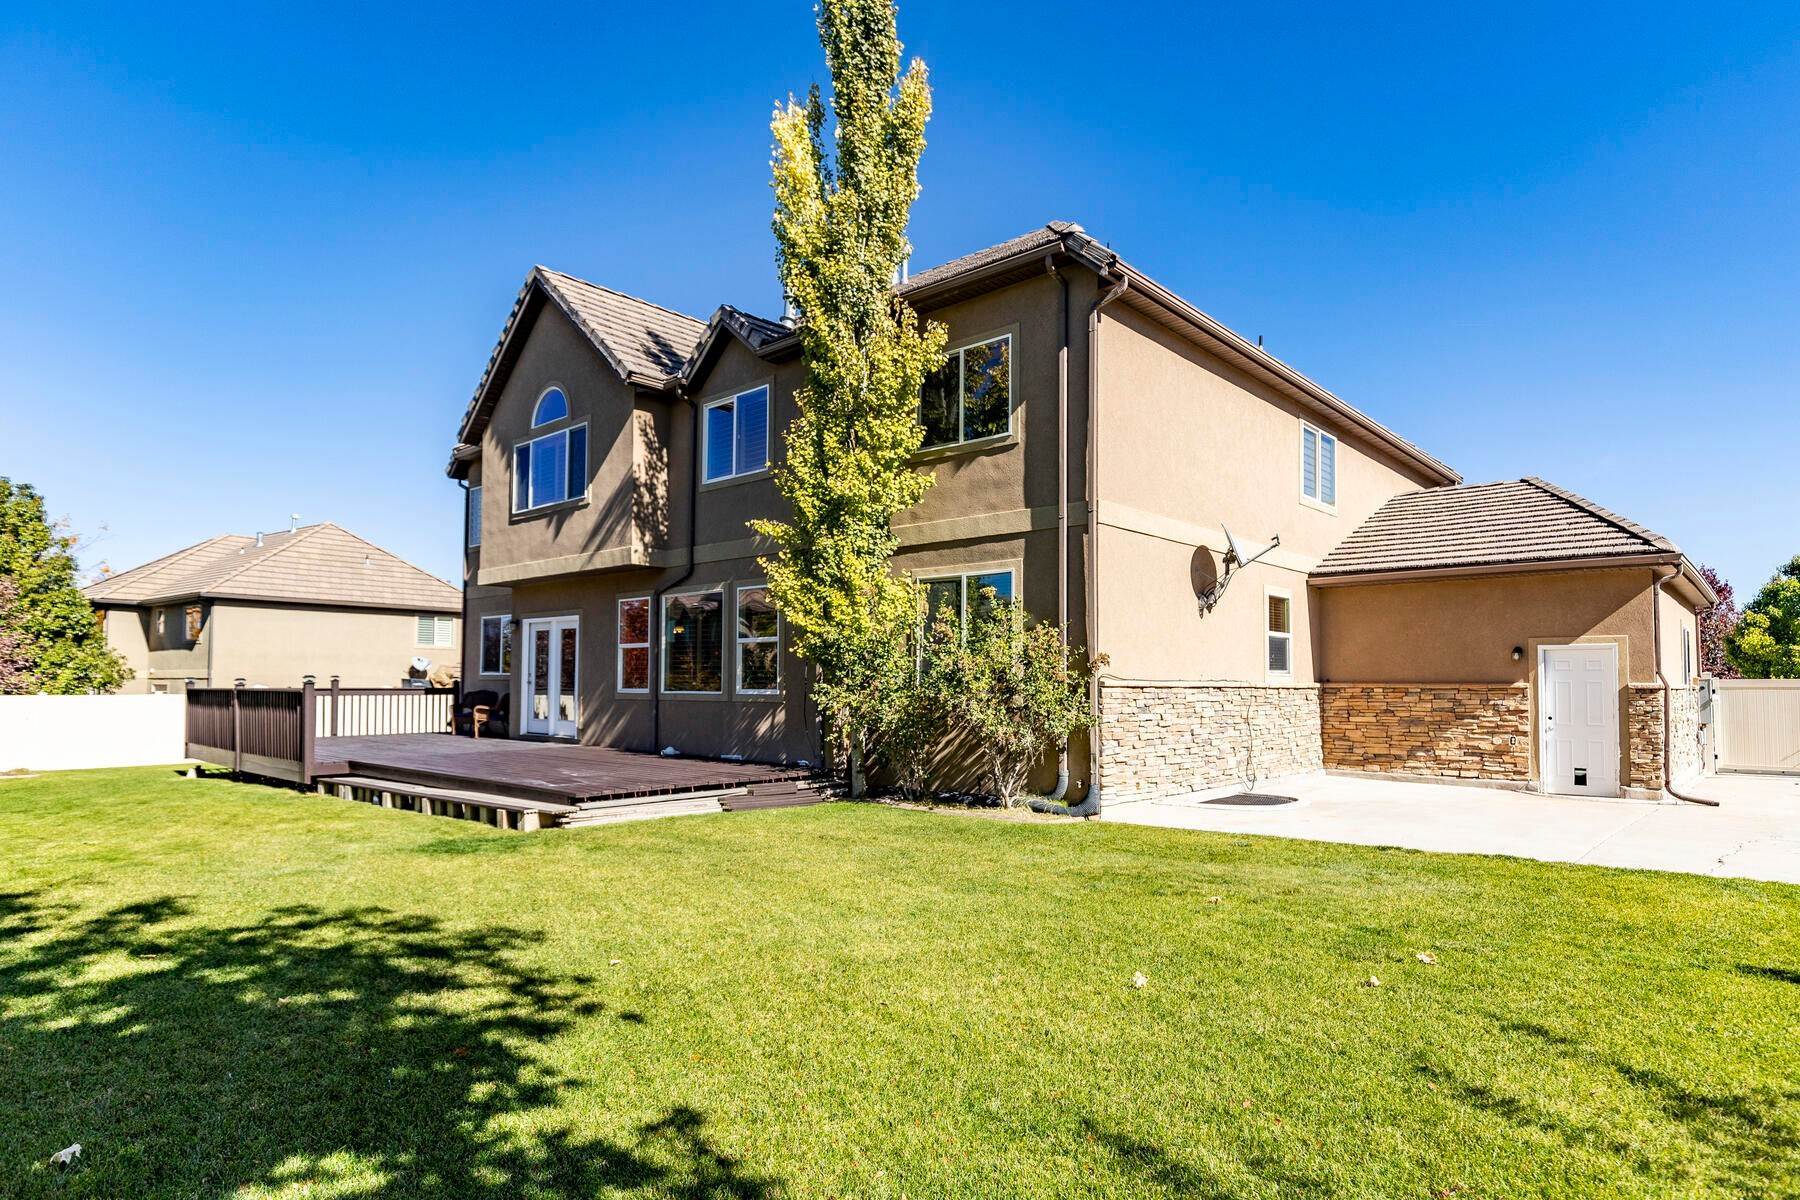 25. Single Family Homes for Sale at This Herriman Cove Home Offers Proximity to a Pond, Trails, and a Community Pool 14394 S Long Ridge Drive Herriman, Utah 84096 United States